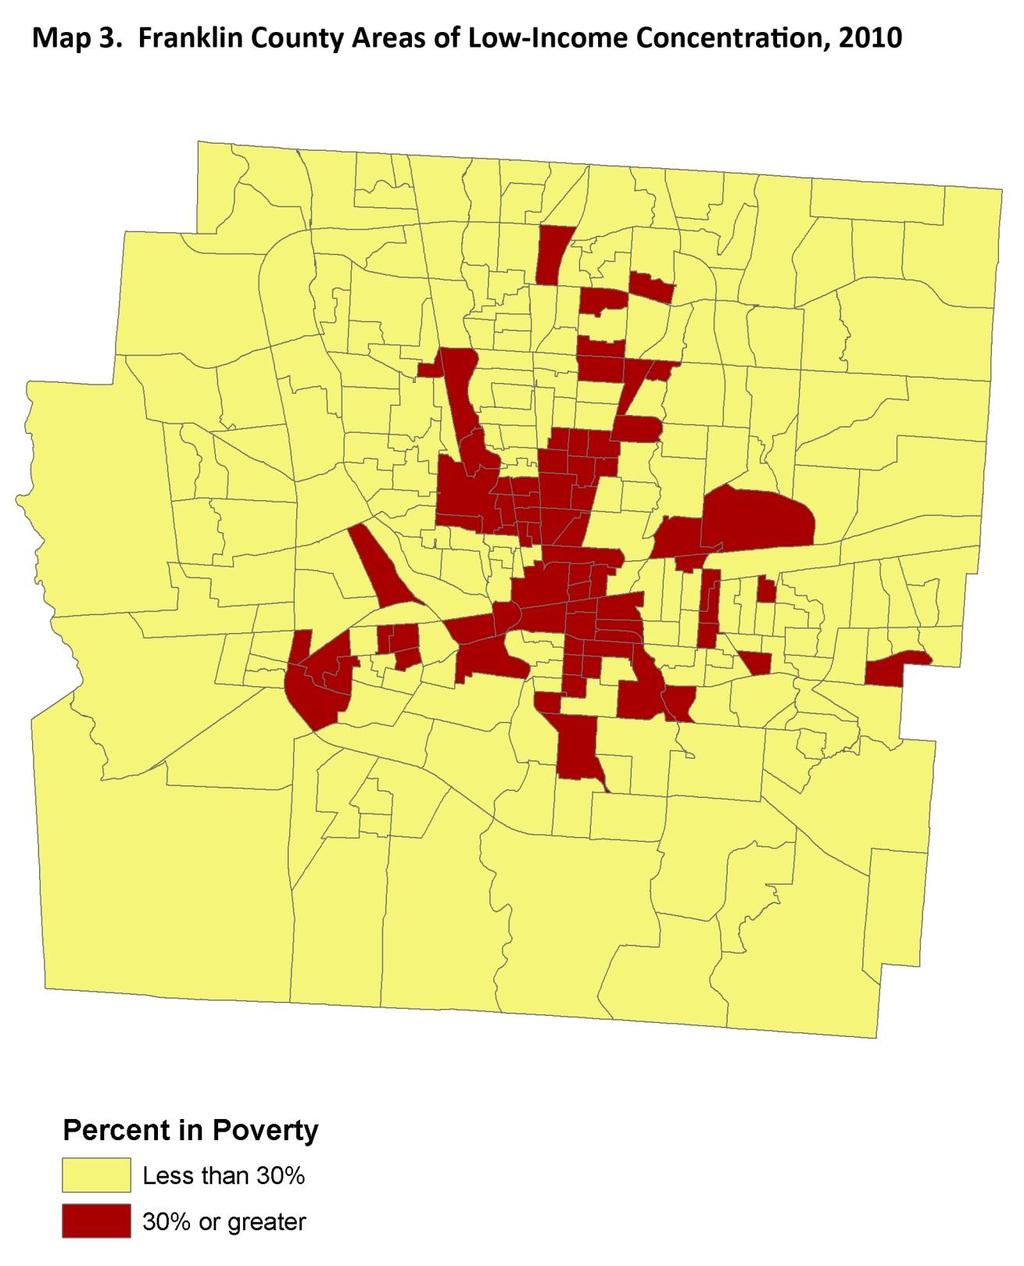 2.5 Areas of Low-Income and Racial Concentration The Columbus Planning Division has divided the city into 27 planning areas, and Columbus City Council has adopted a total of 54 area and neighborhood